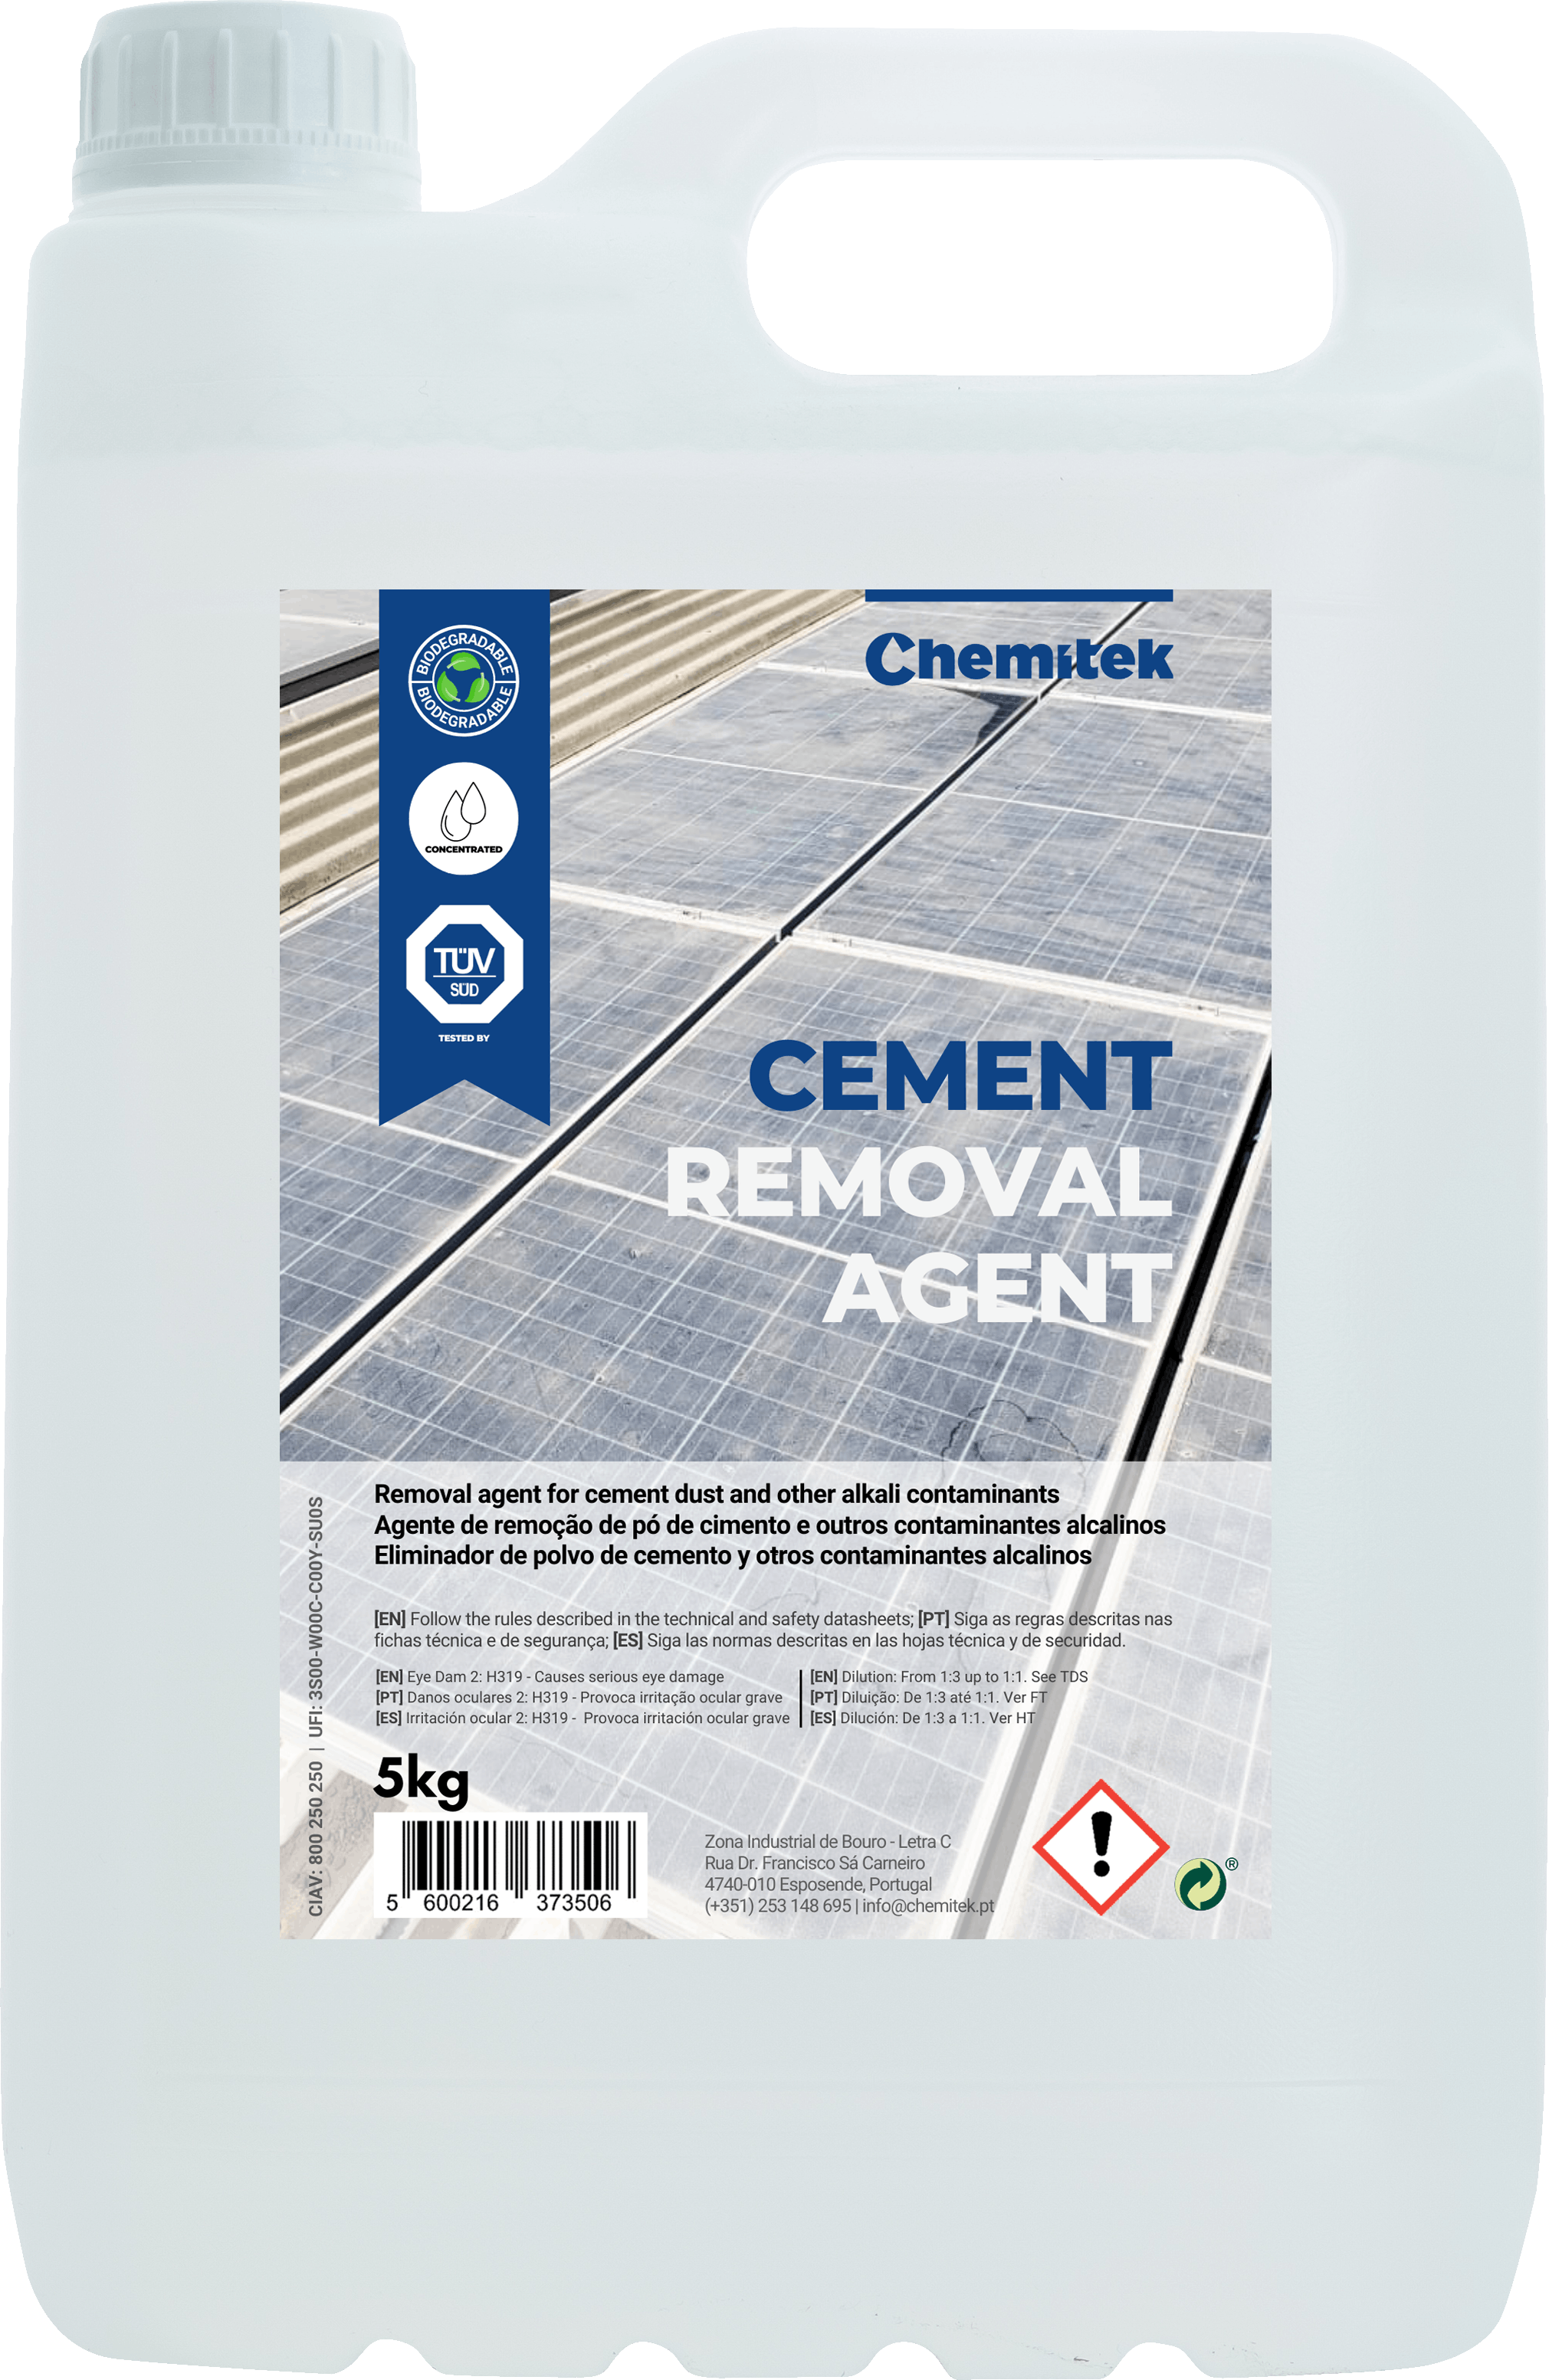 Product - Cement Removal Agent